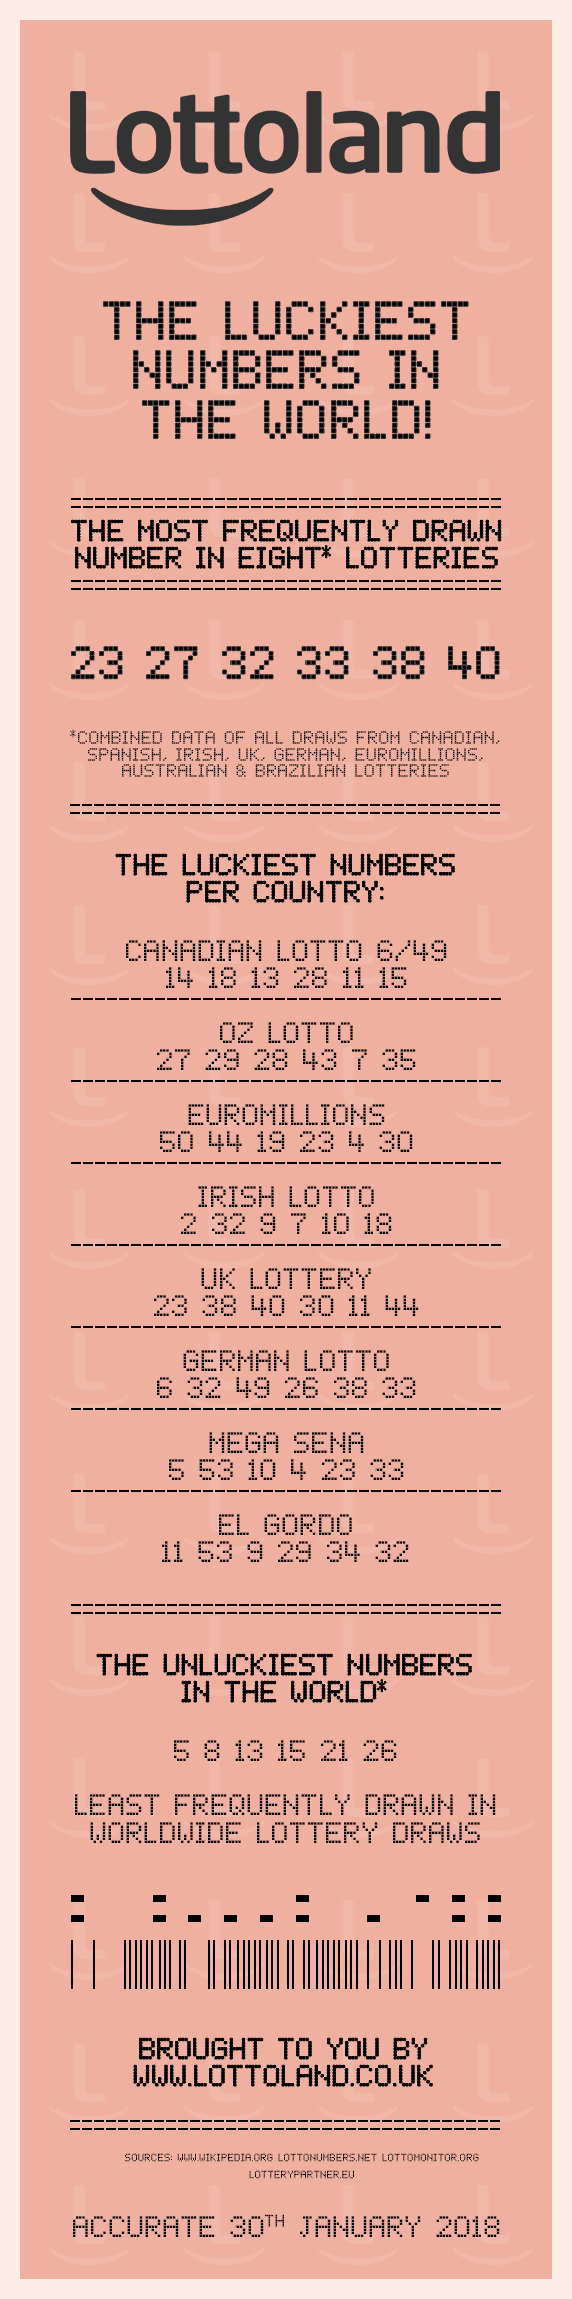 lotto numbers 13th march 2019